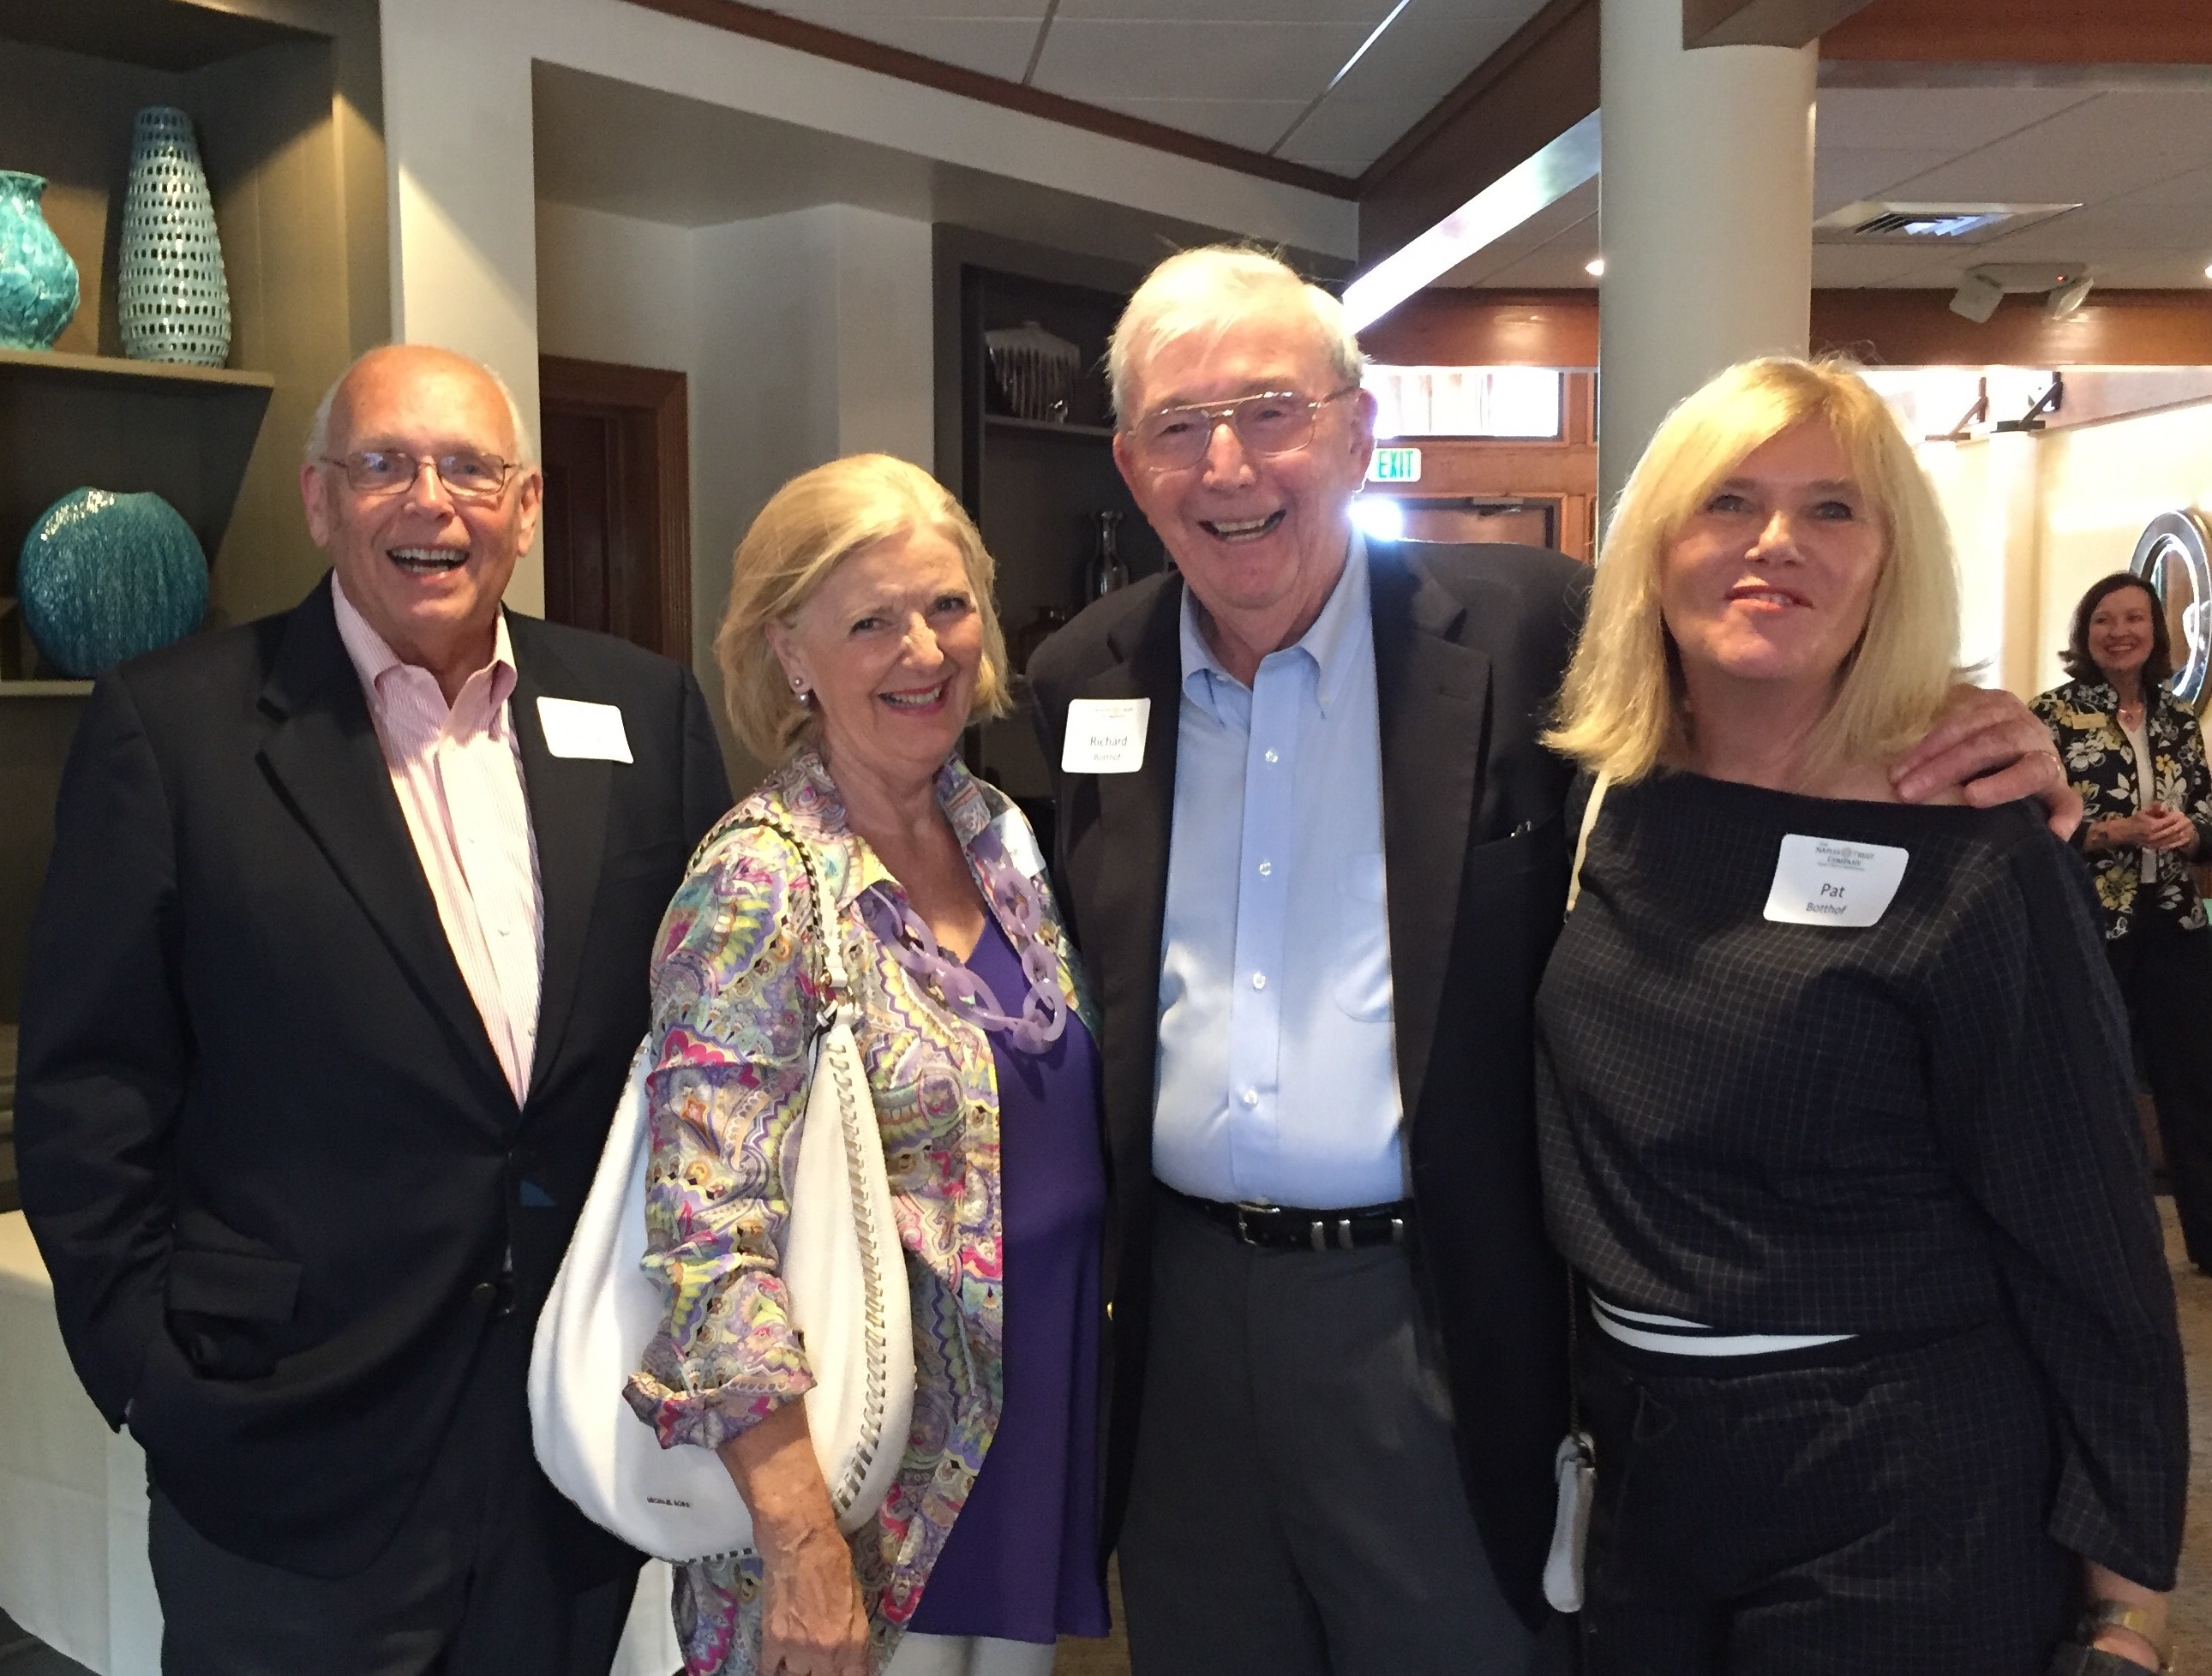 Terry and Christine Flynn with The Naples Trust Company board member emeritus, Dick Botthof and wife, Pat